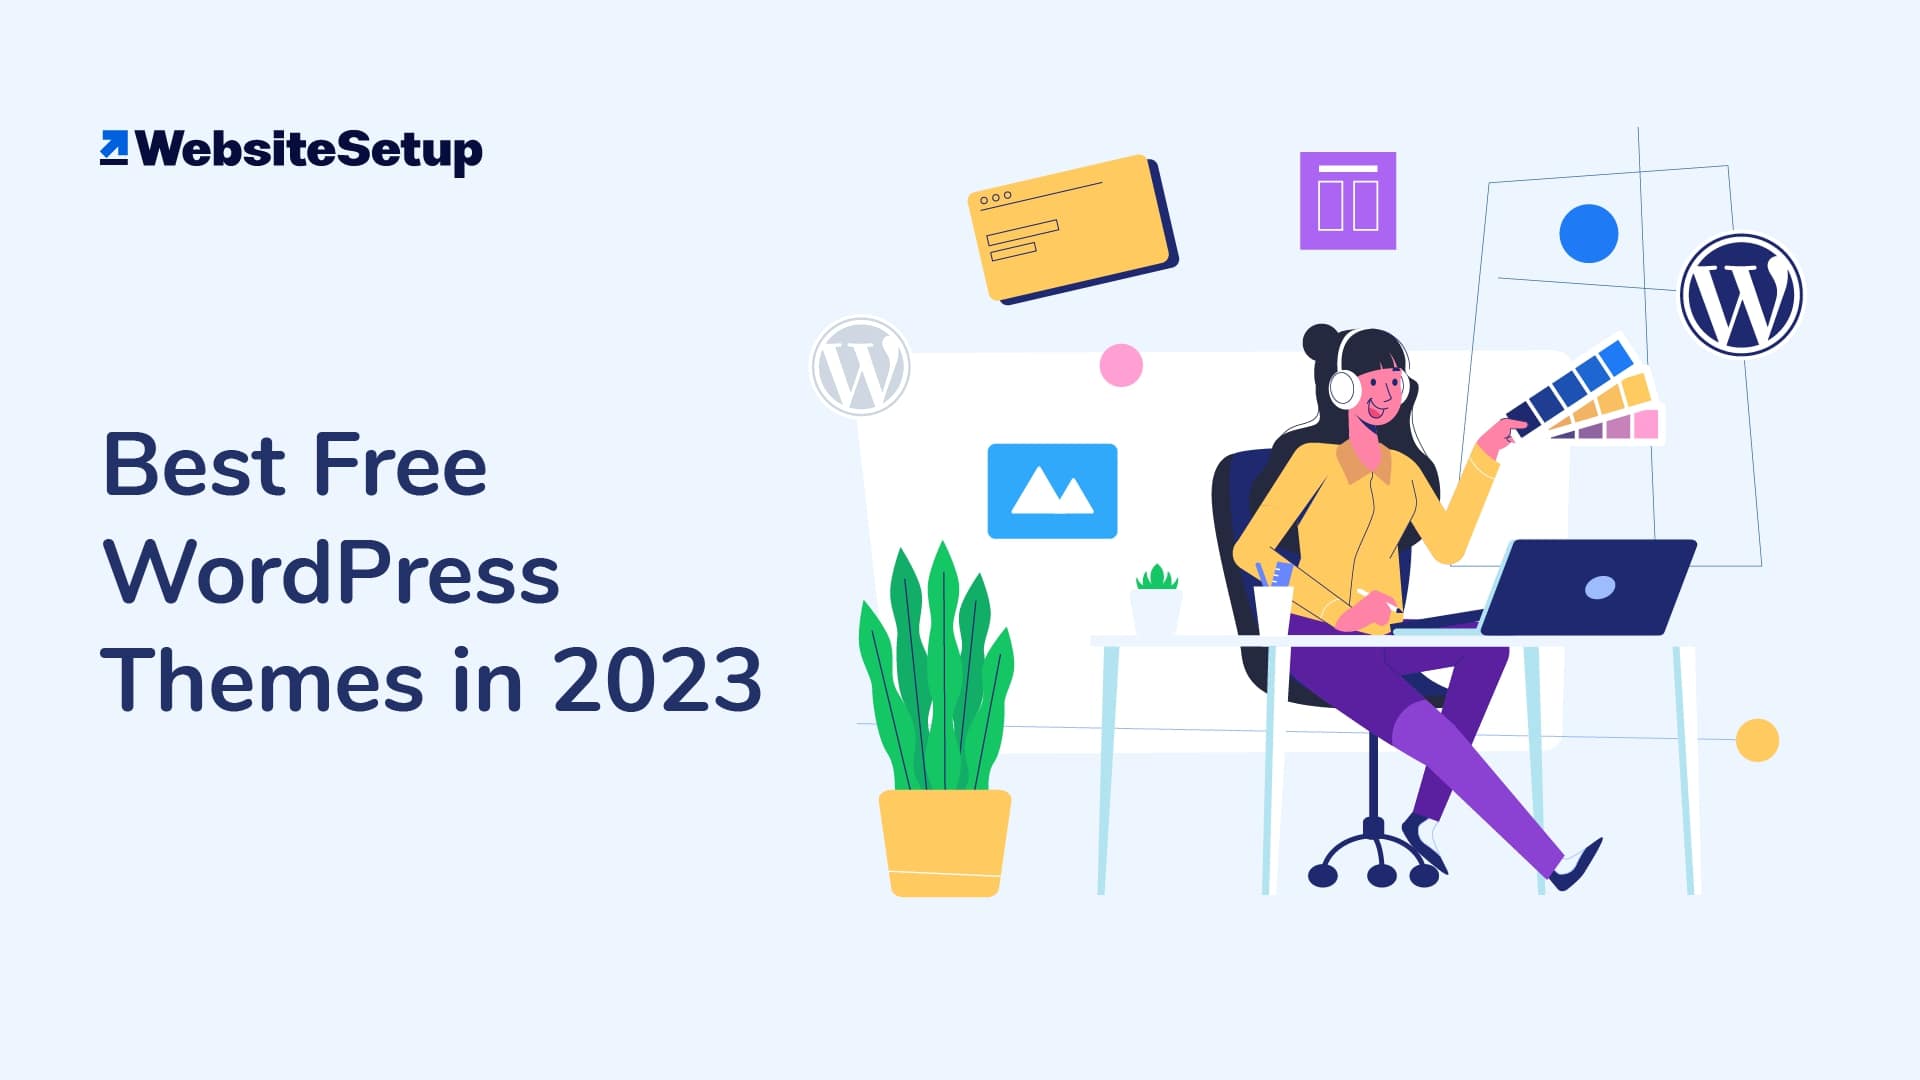 Best Free WordPress Themes You Can Use in 2023